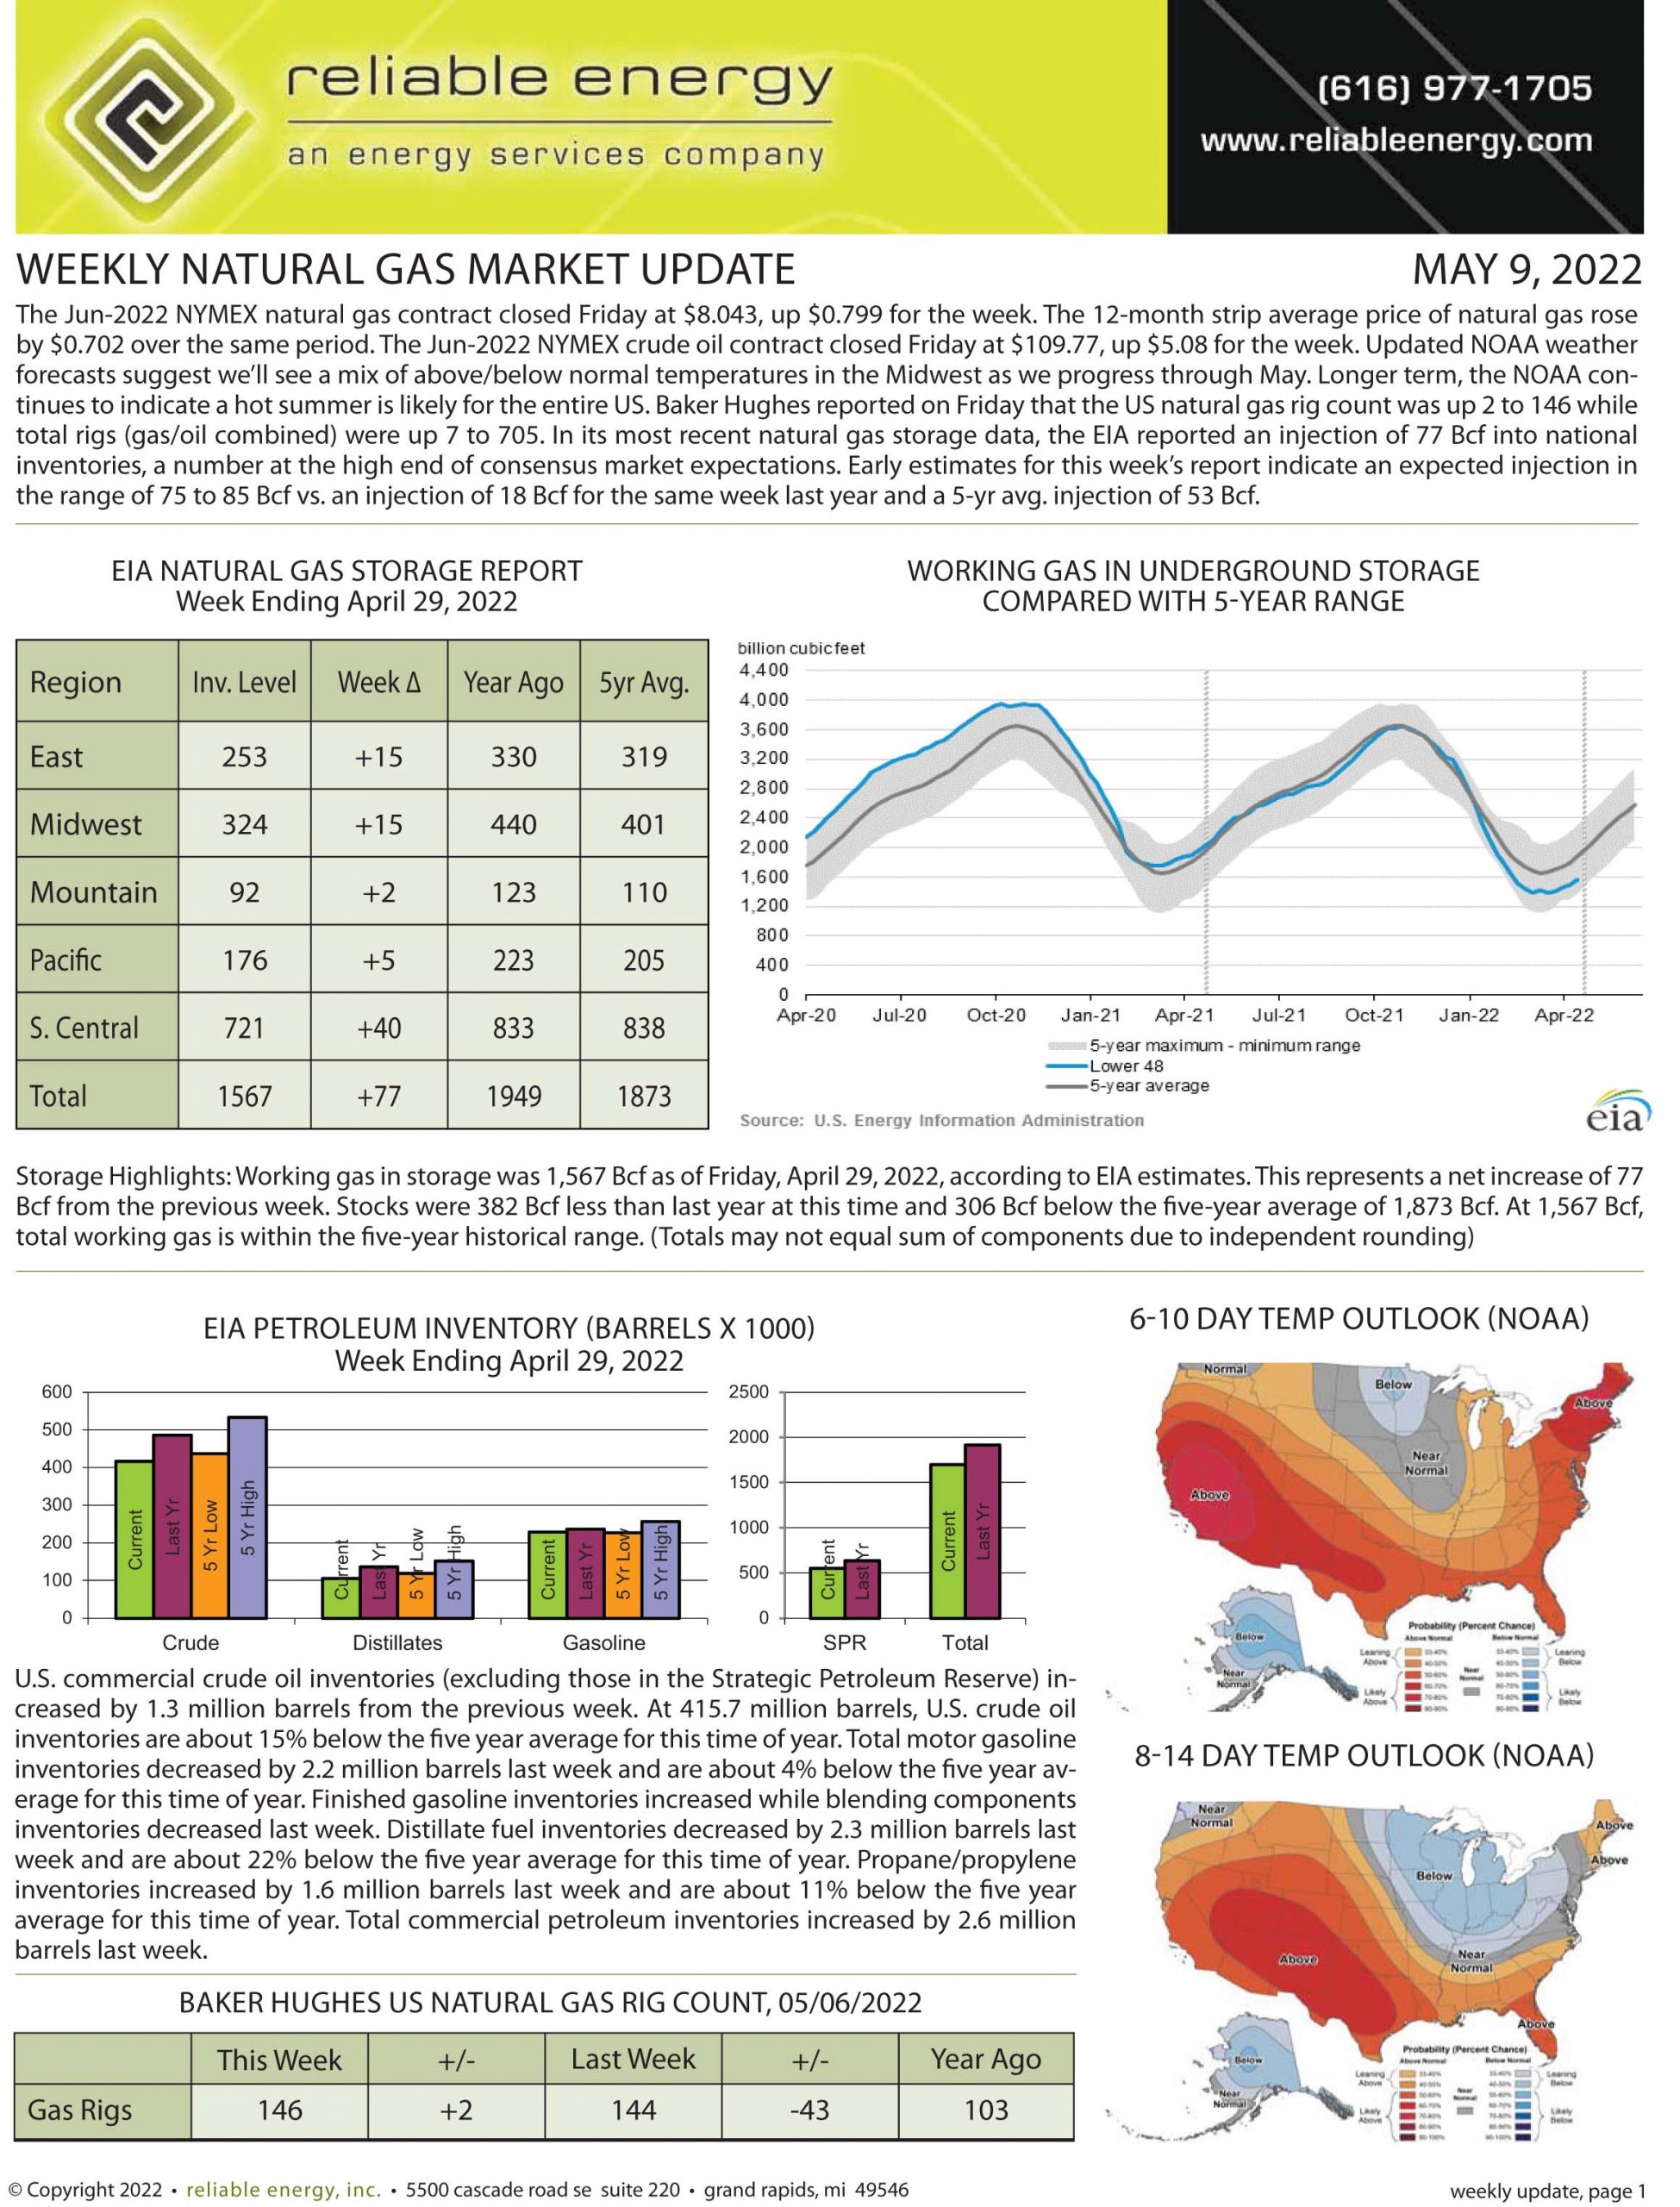 Natural Gas Market Update – May 9, 2022